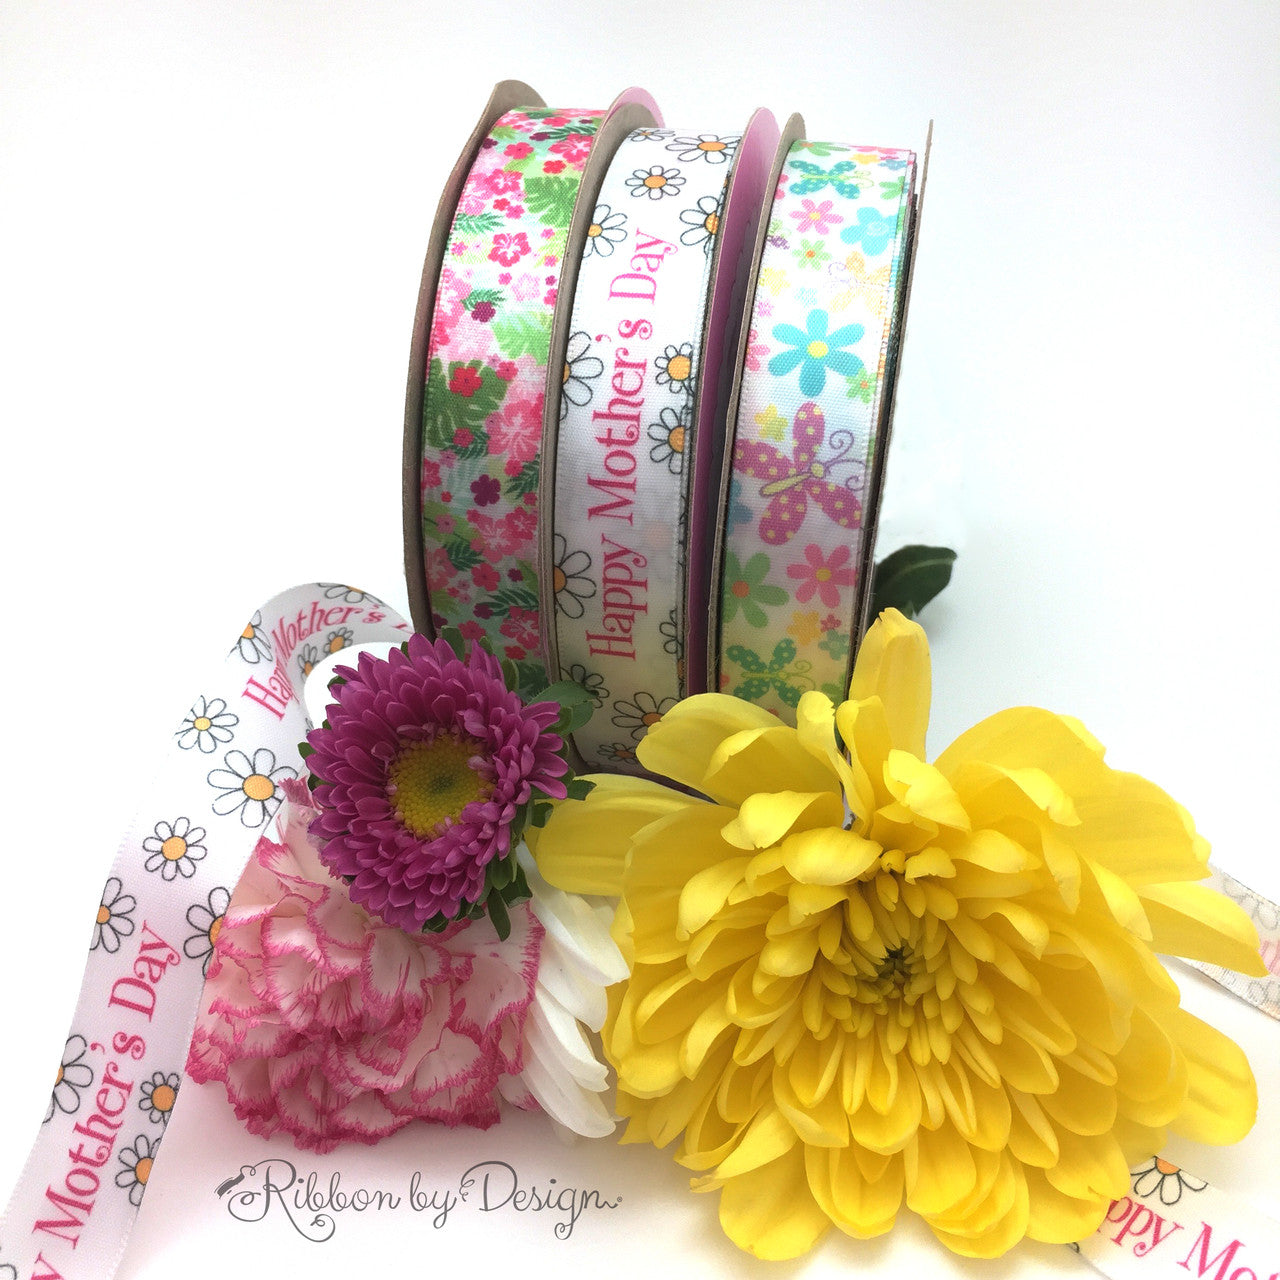 These little butterflies are a perfect compliment to our 5/8" Happy Mother's Day ribbon and pink floral designs! Mix and match these ribbons for a fun floral themed Mother's Day brunch!